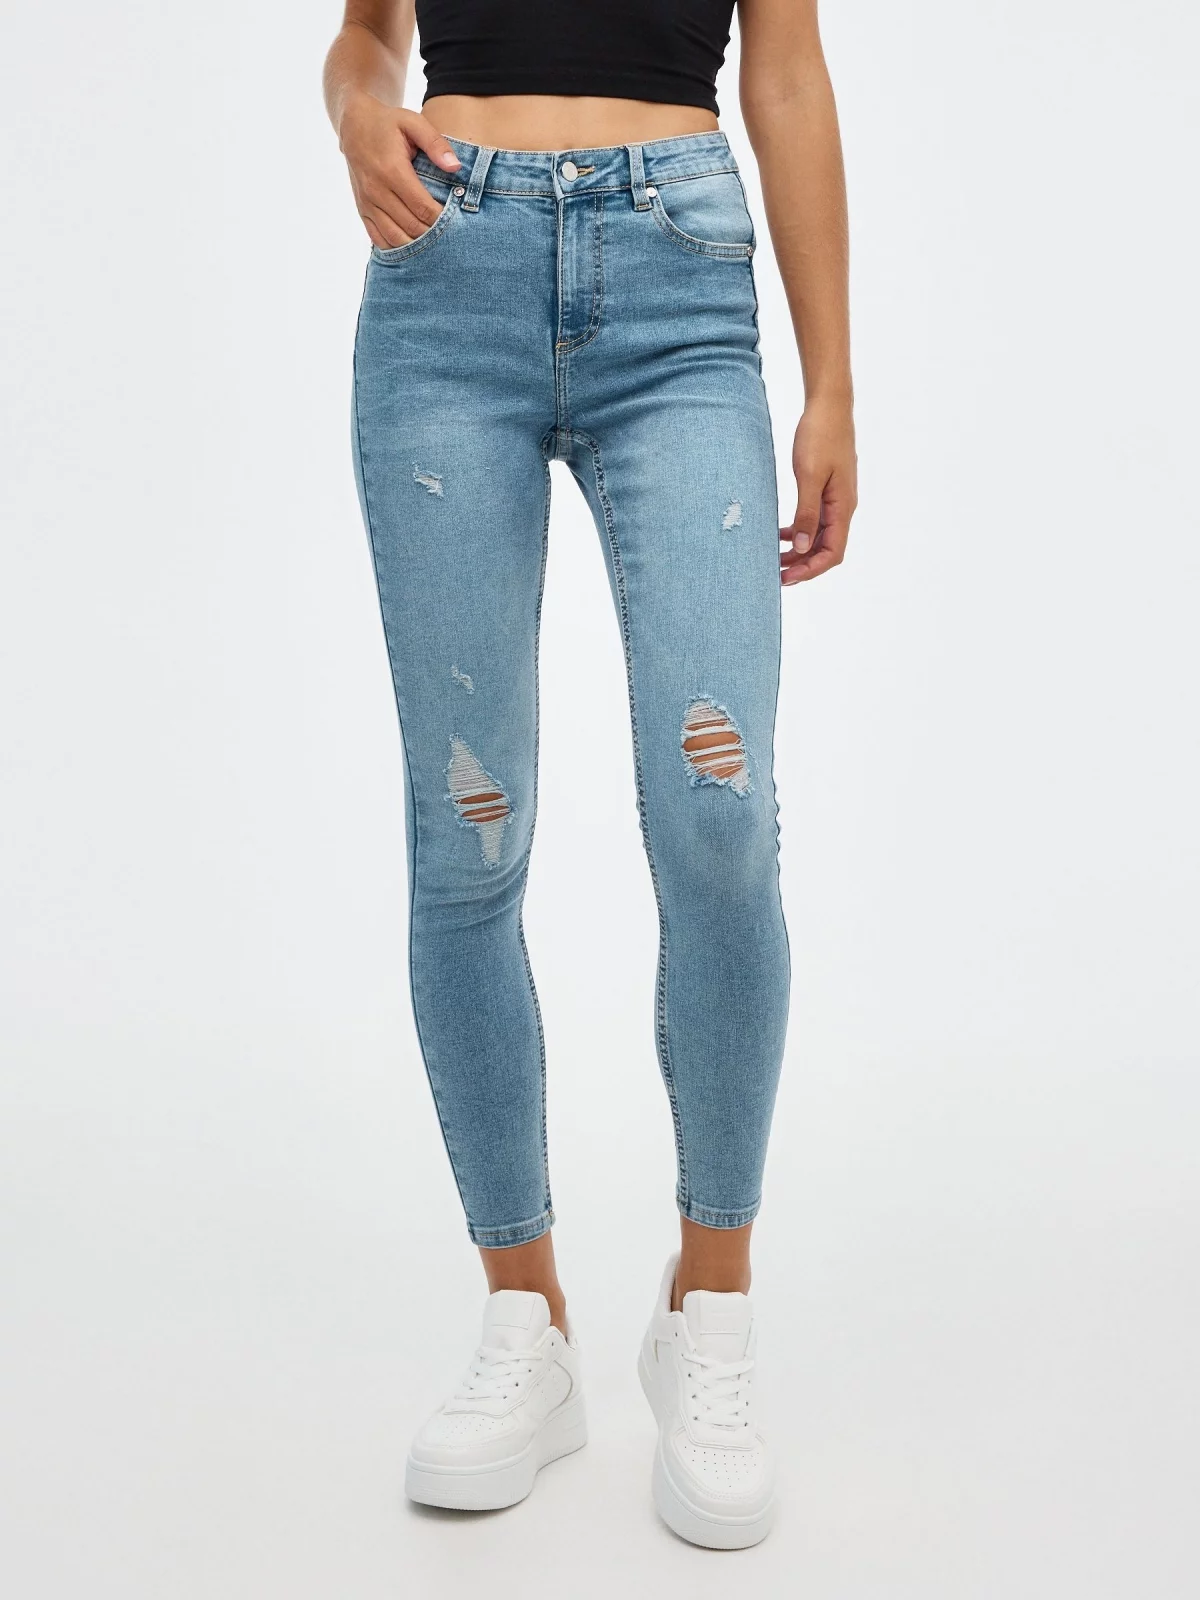 Jeans mid rise skinny push up light blue middle front view